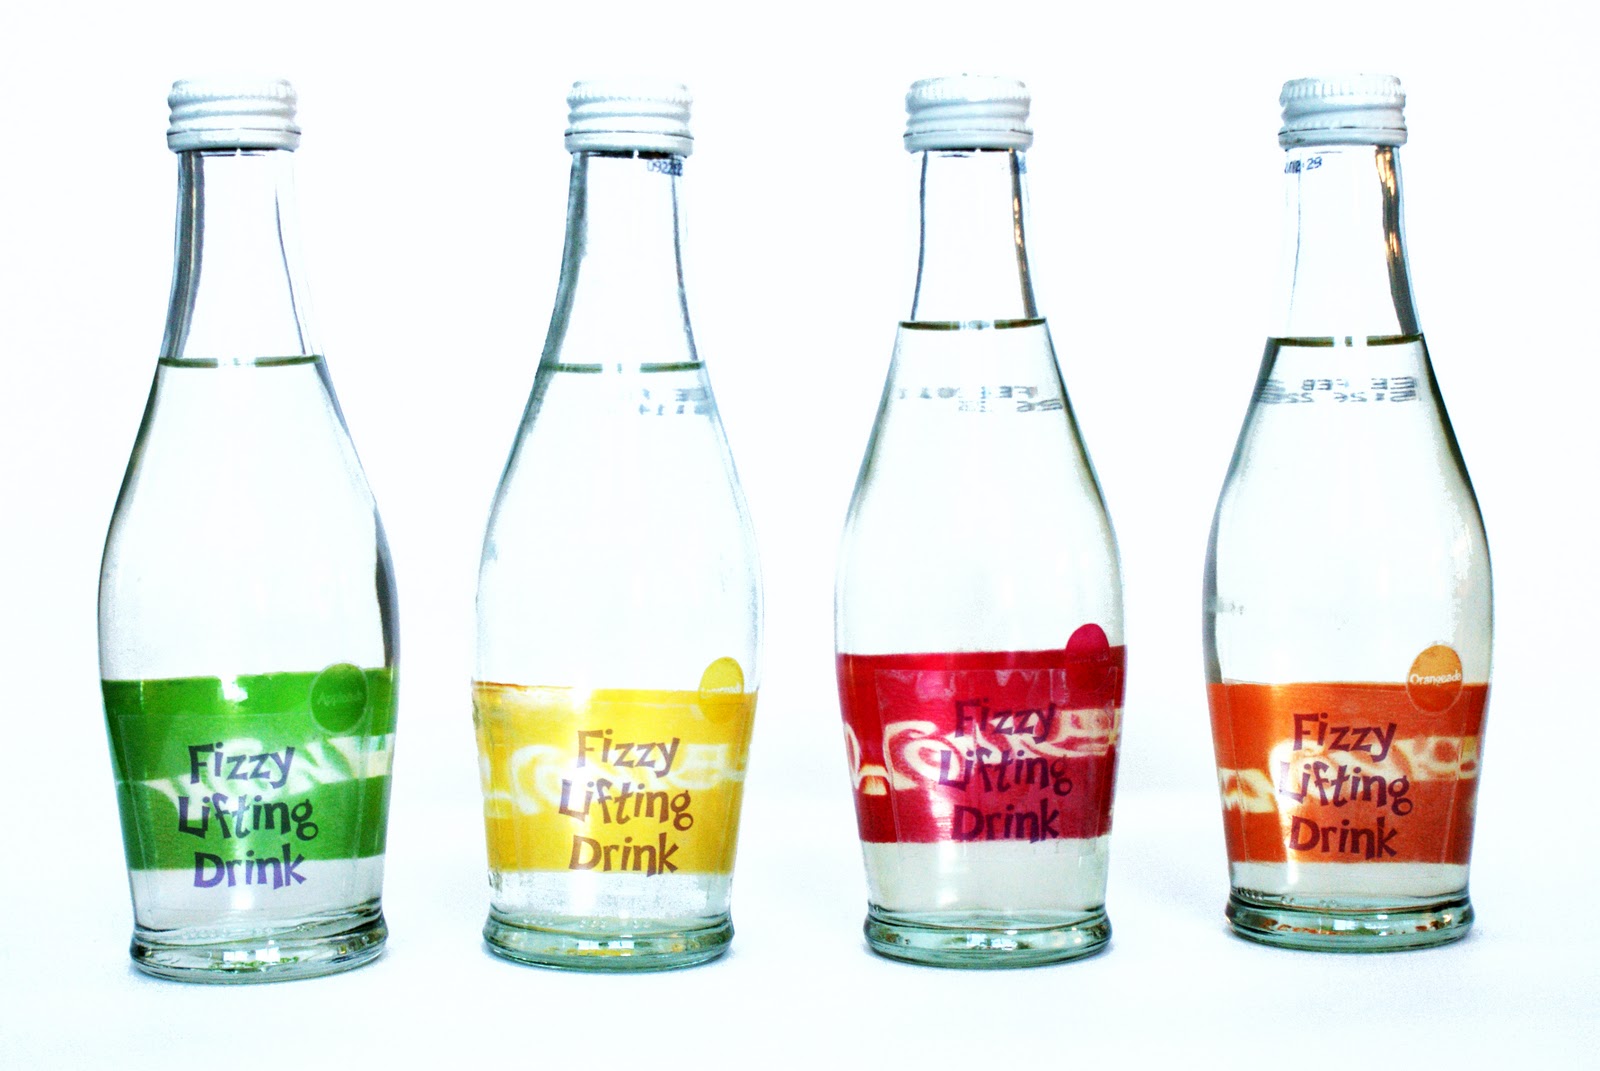 hj03-design-practice-fizzy-lifting-drink-product-shots